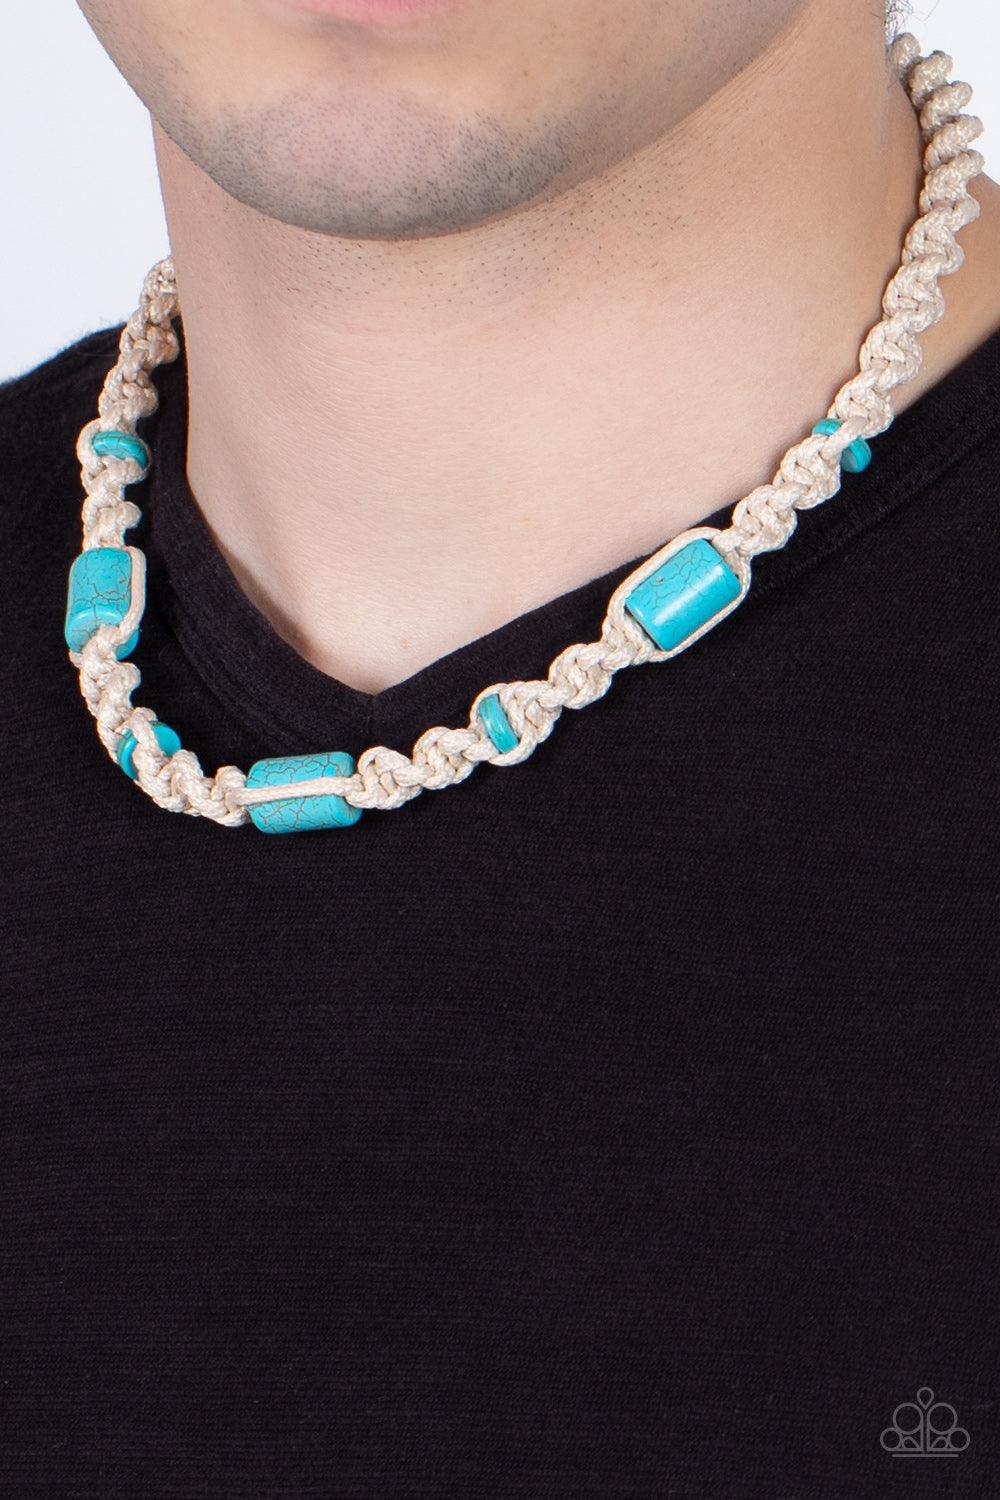 Paparazzi Accessories Explorer Exclusive - Blue Three generous cylindrical blue stones and small flat stone accents are thoughtfully woven into a macramé style necklace. The natural cord is knotted into a chunky spiral design creating a homespun sensation